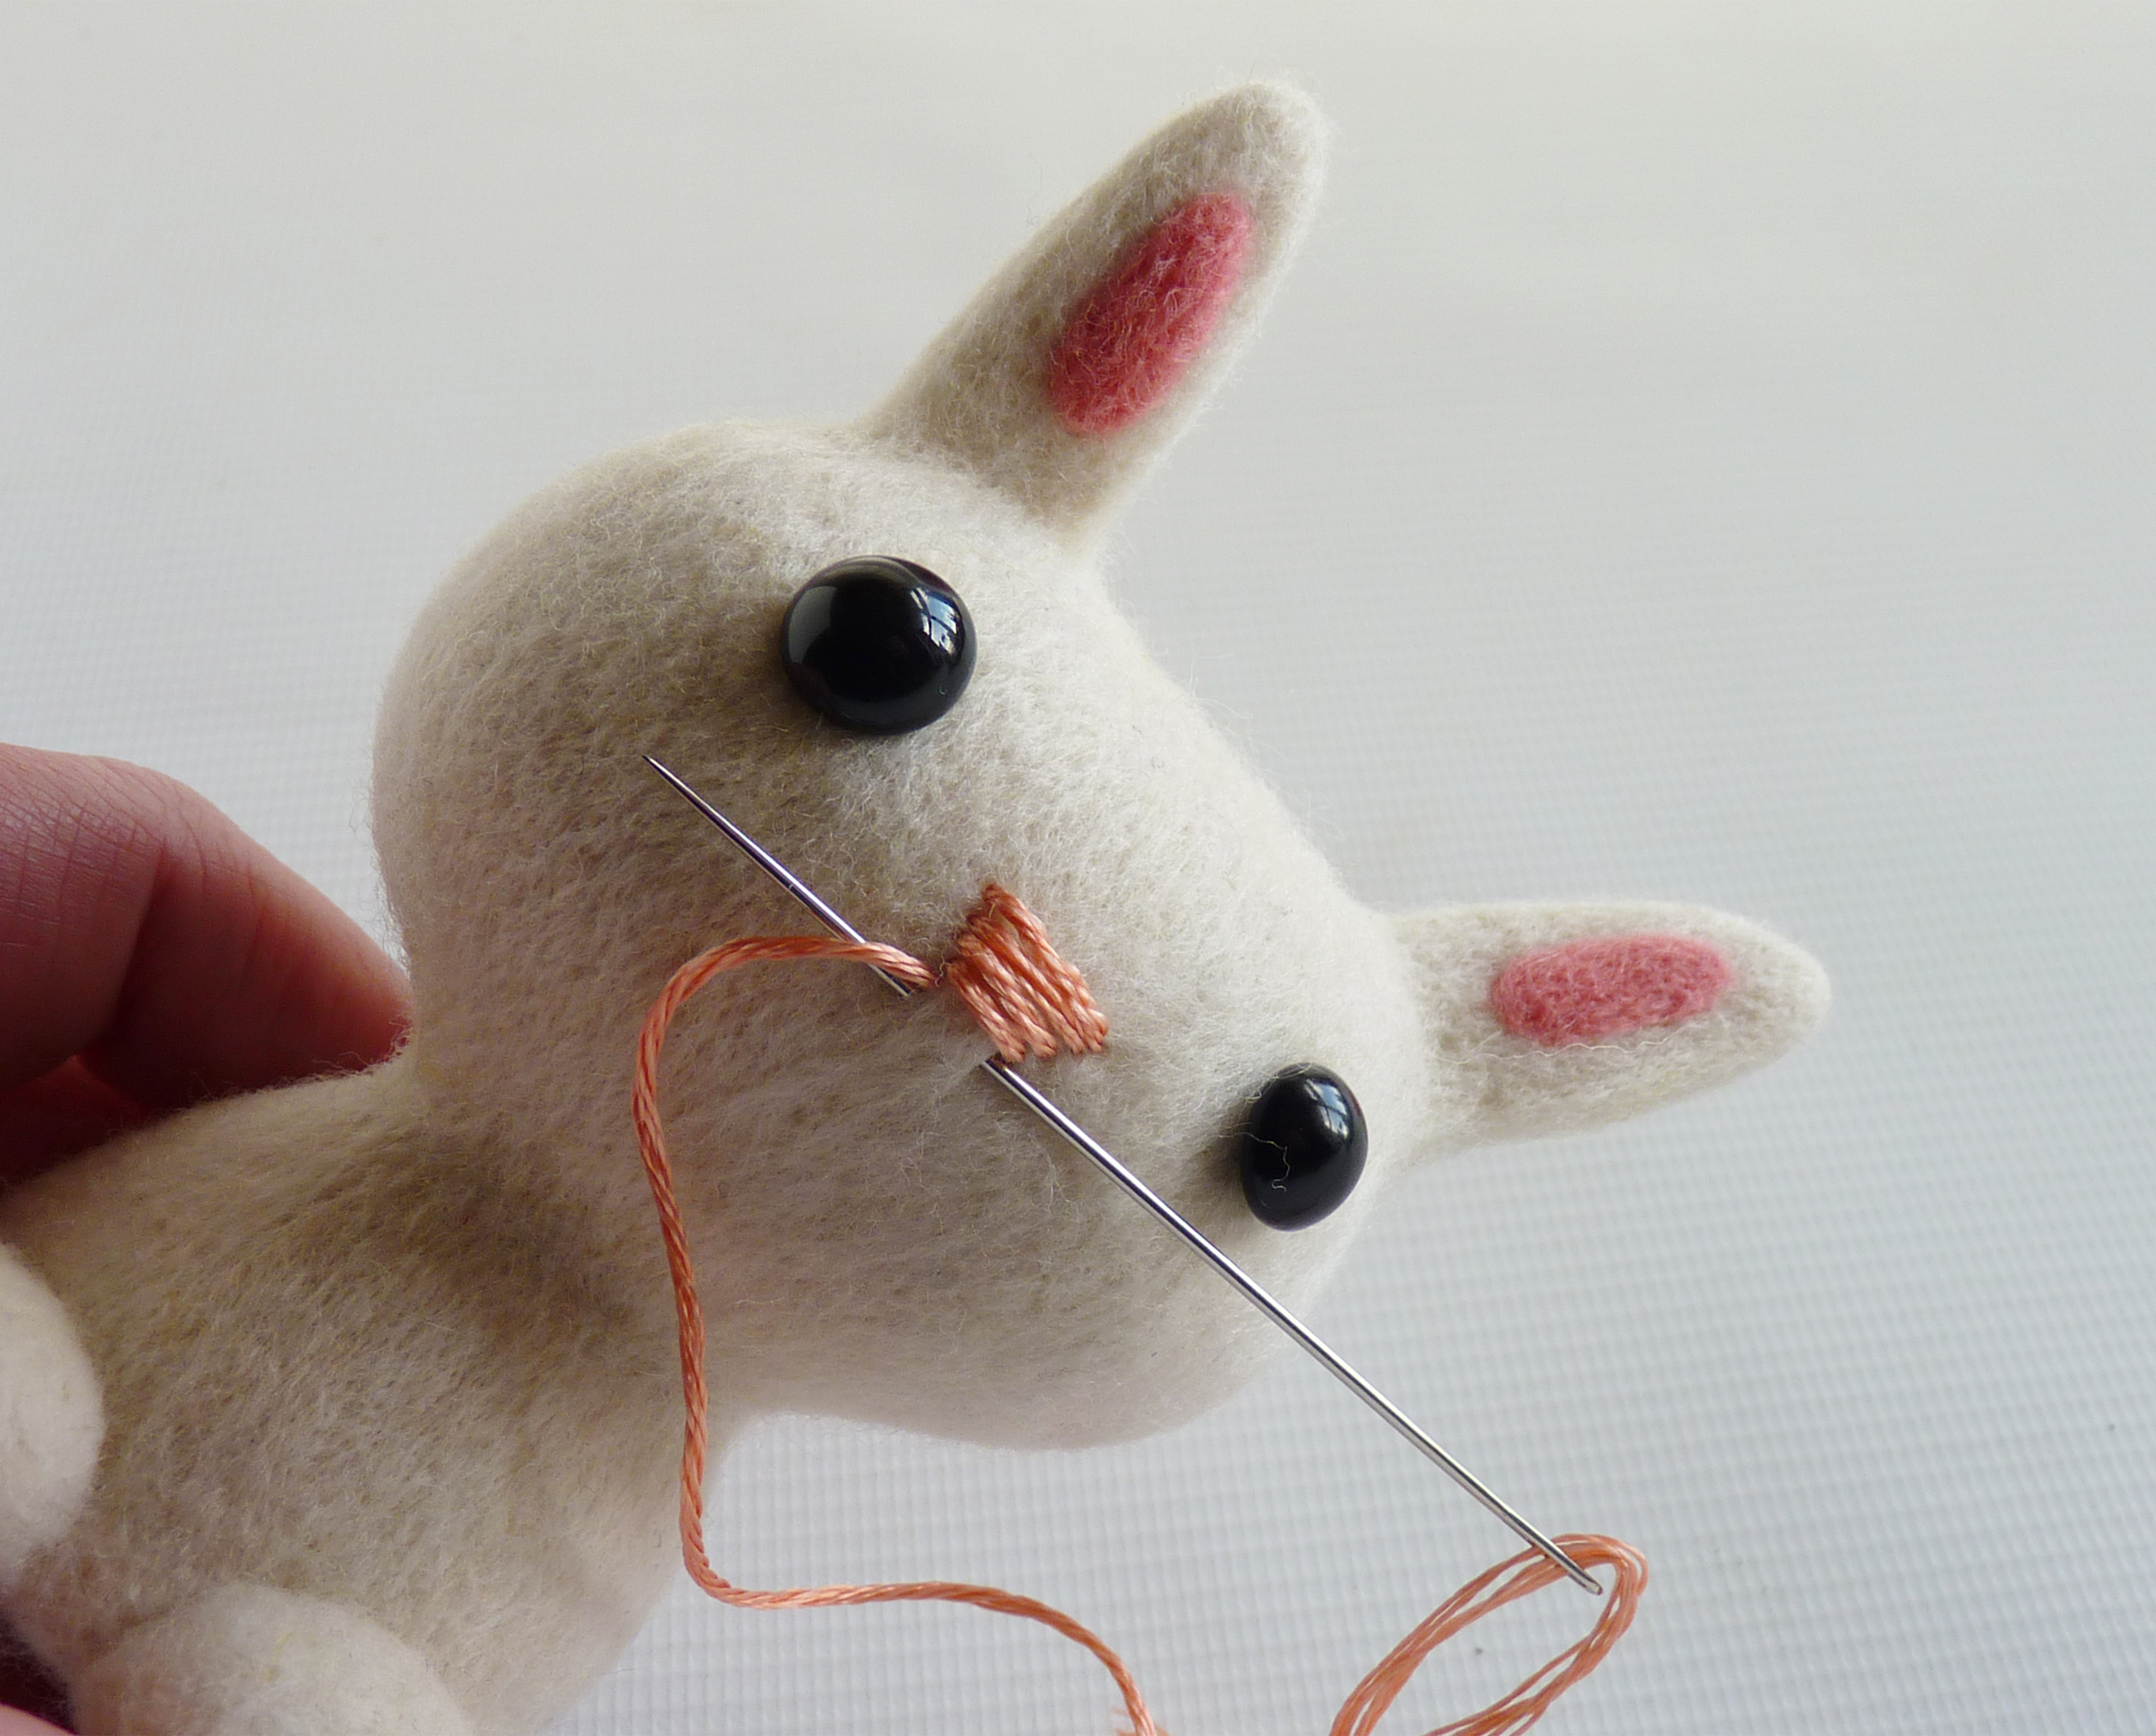 How to make needle felted animals - step 19